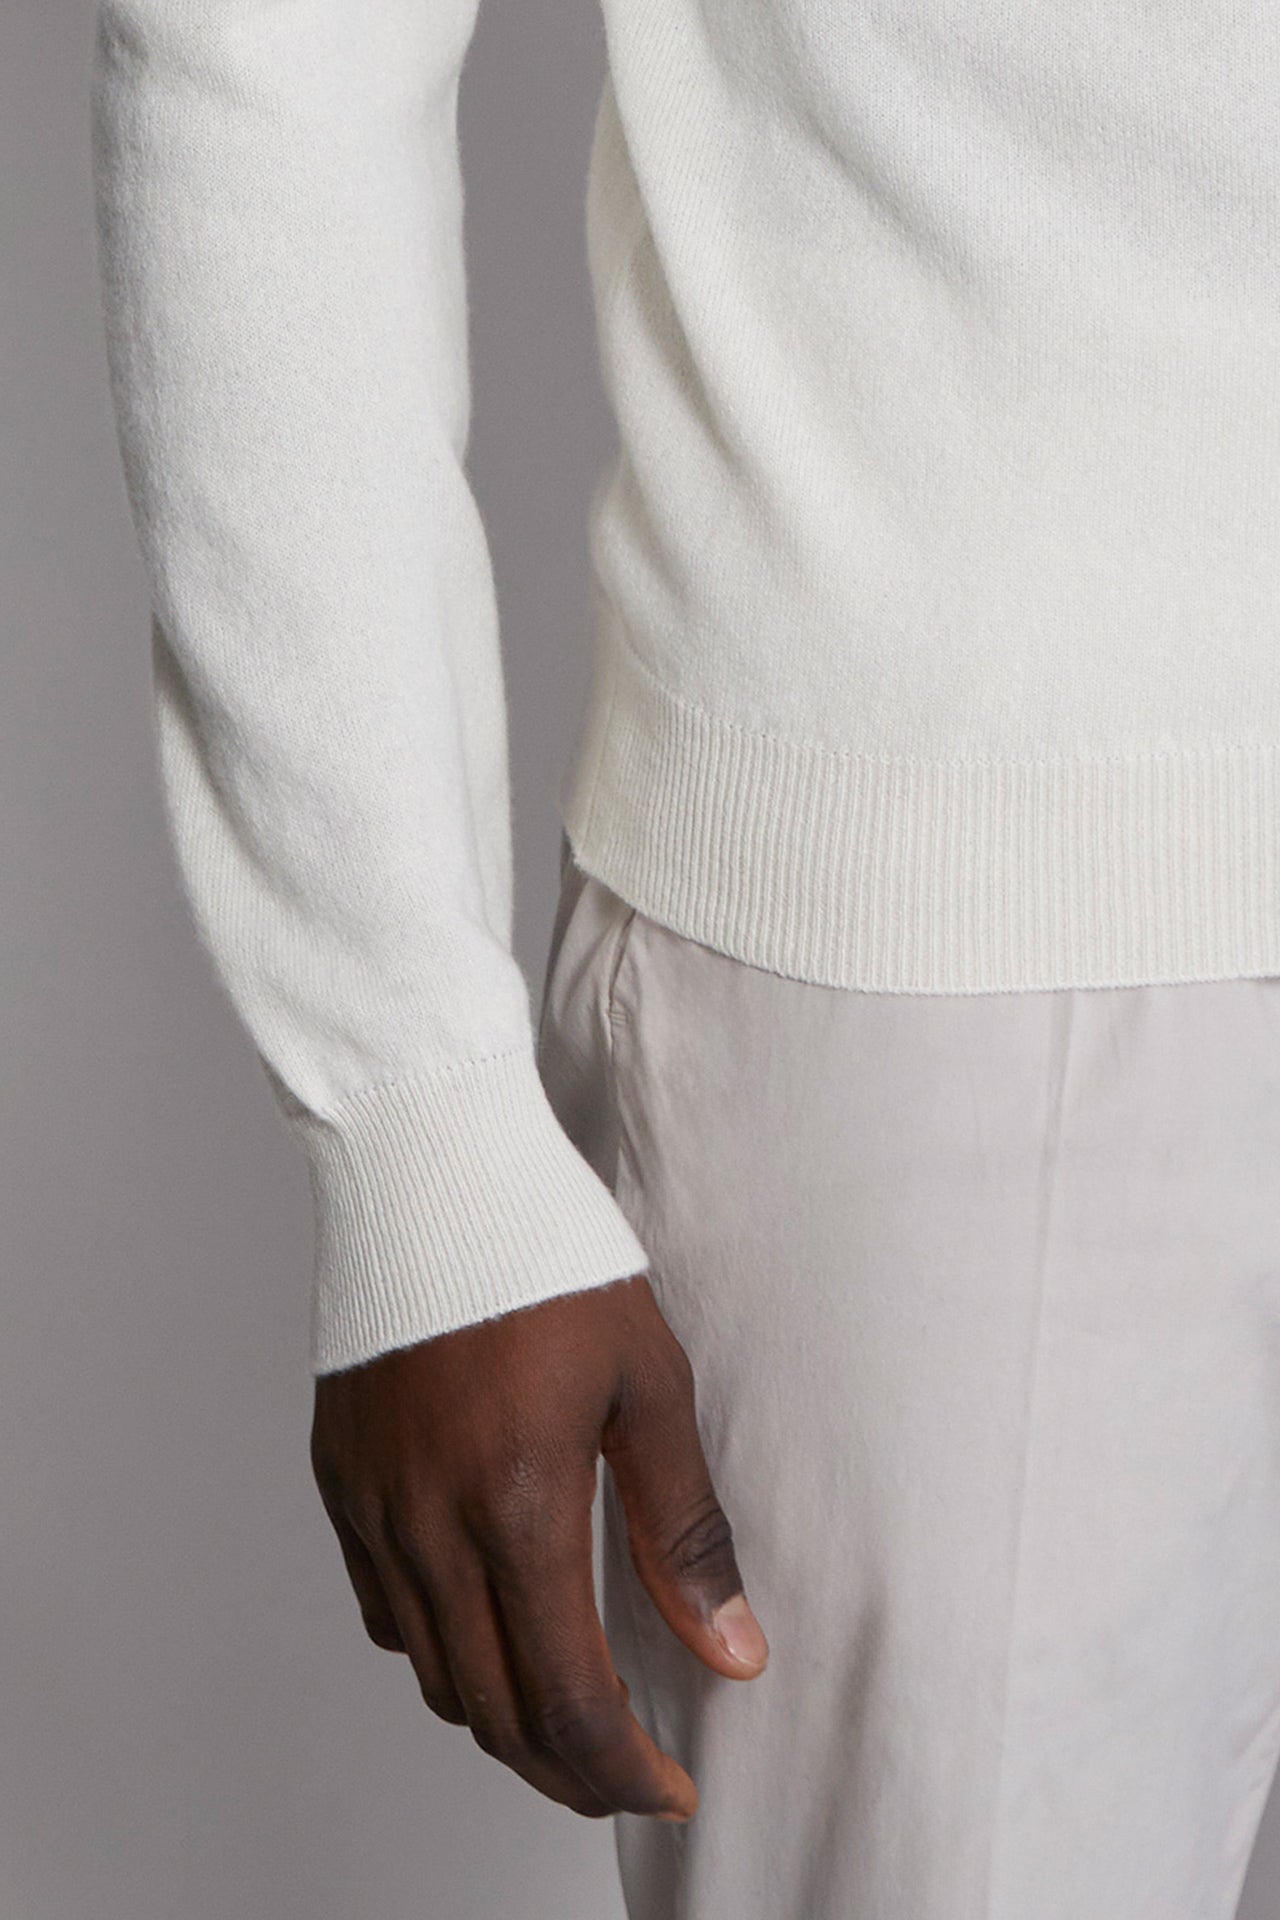 Derby cashmere turtleneck in iconic colors